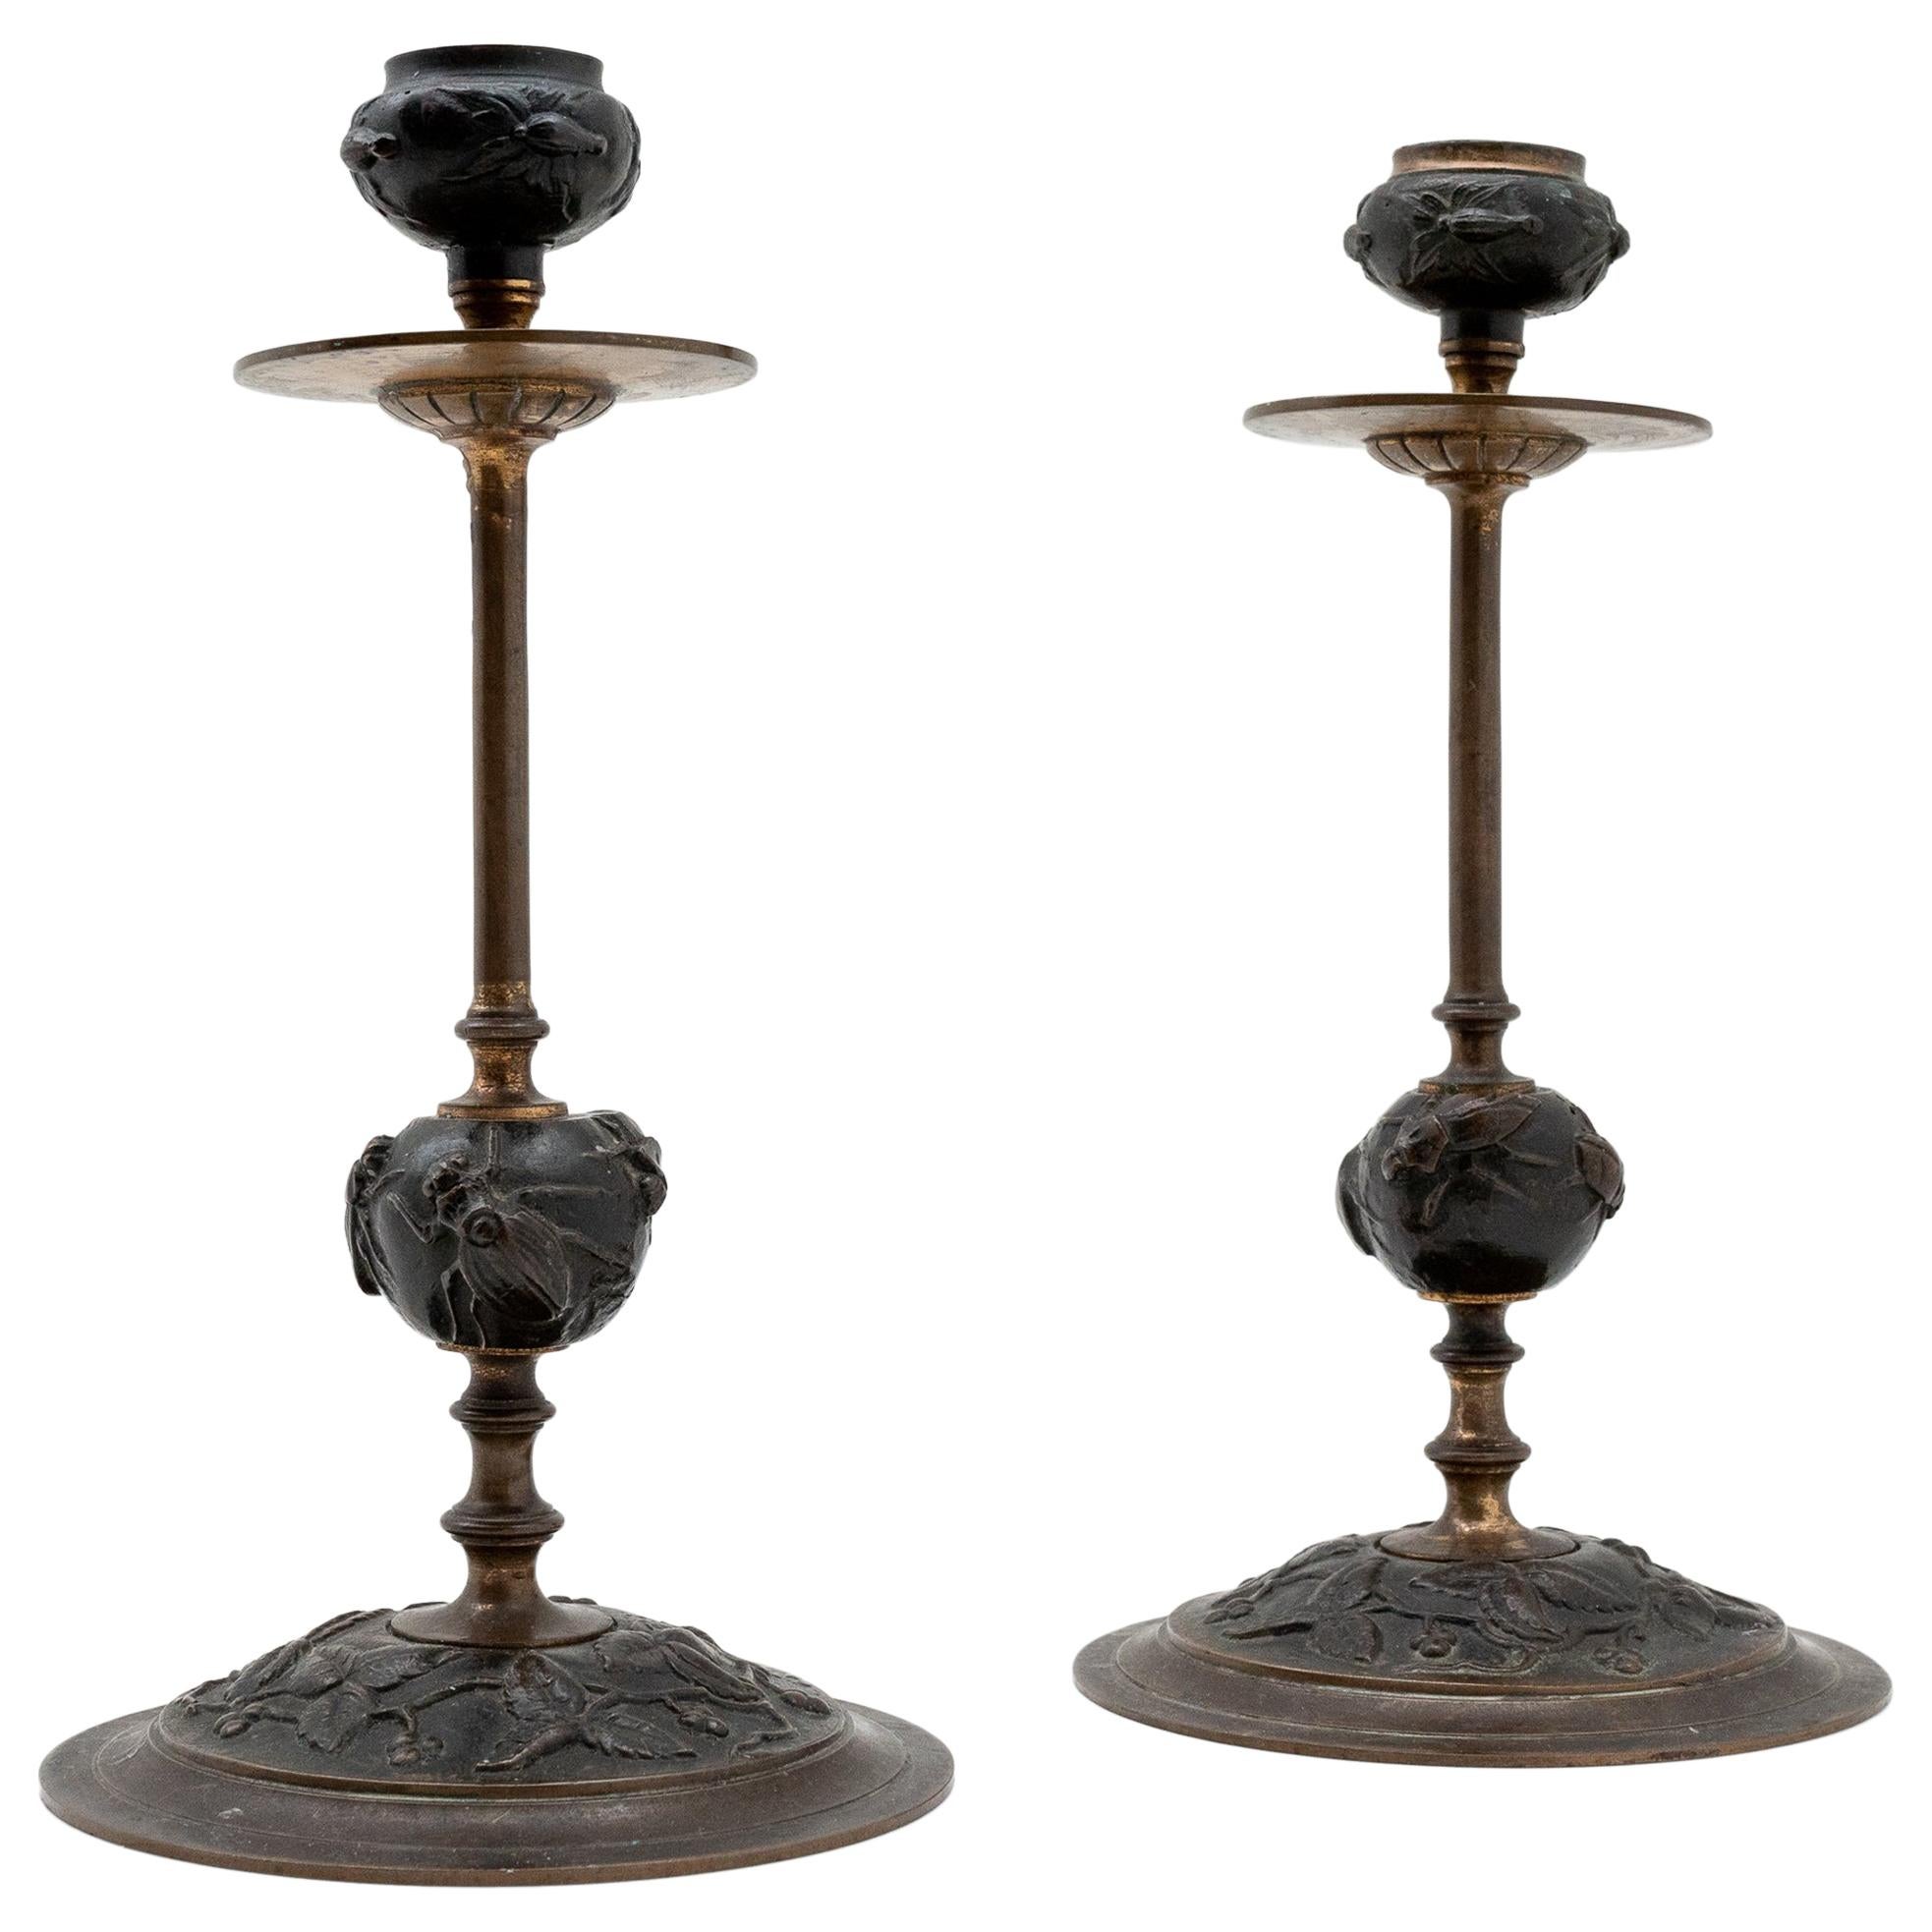 Bronze Candlestick Pair with Insect/Leaf Decoration, French, 19th Century